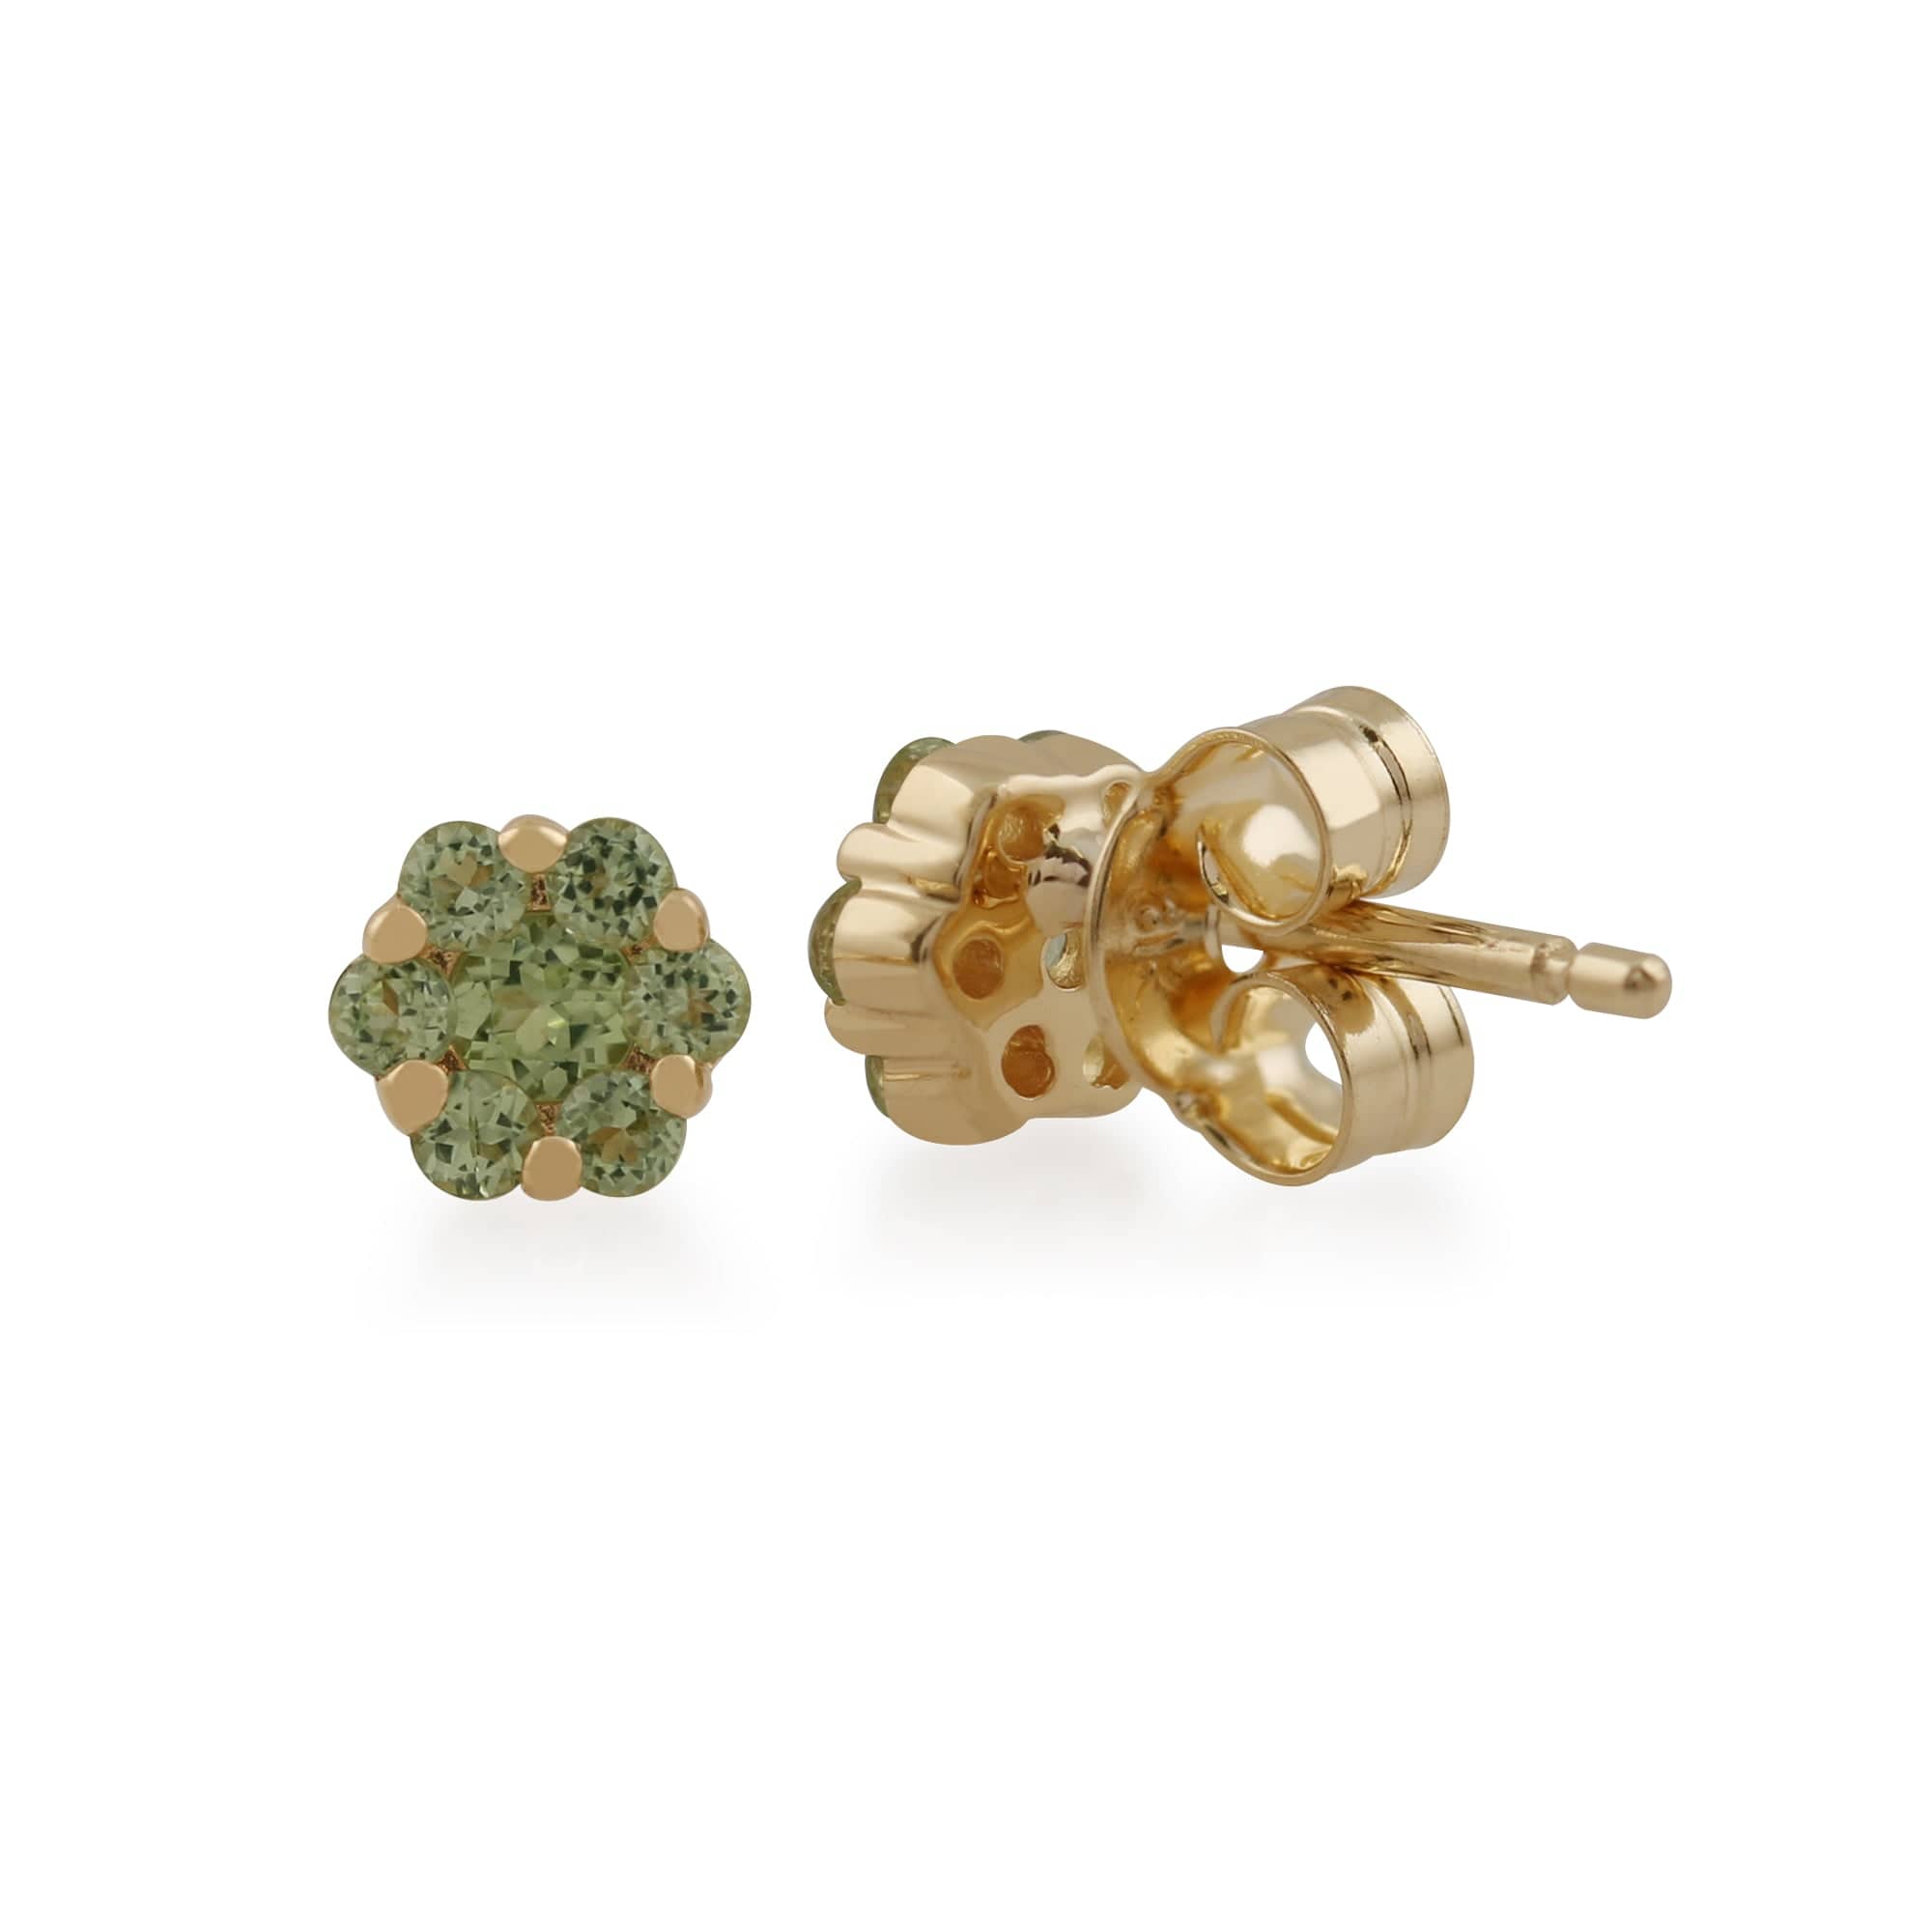 Floral Round Peridot Cluster Stud Earrings in 9ct Yellow Gold - Gemondo